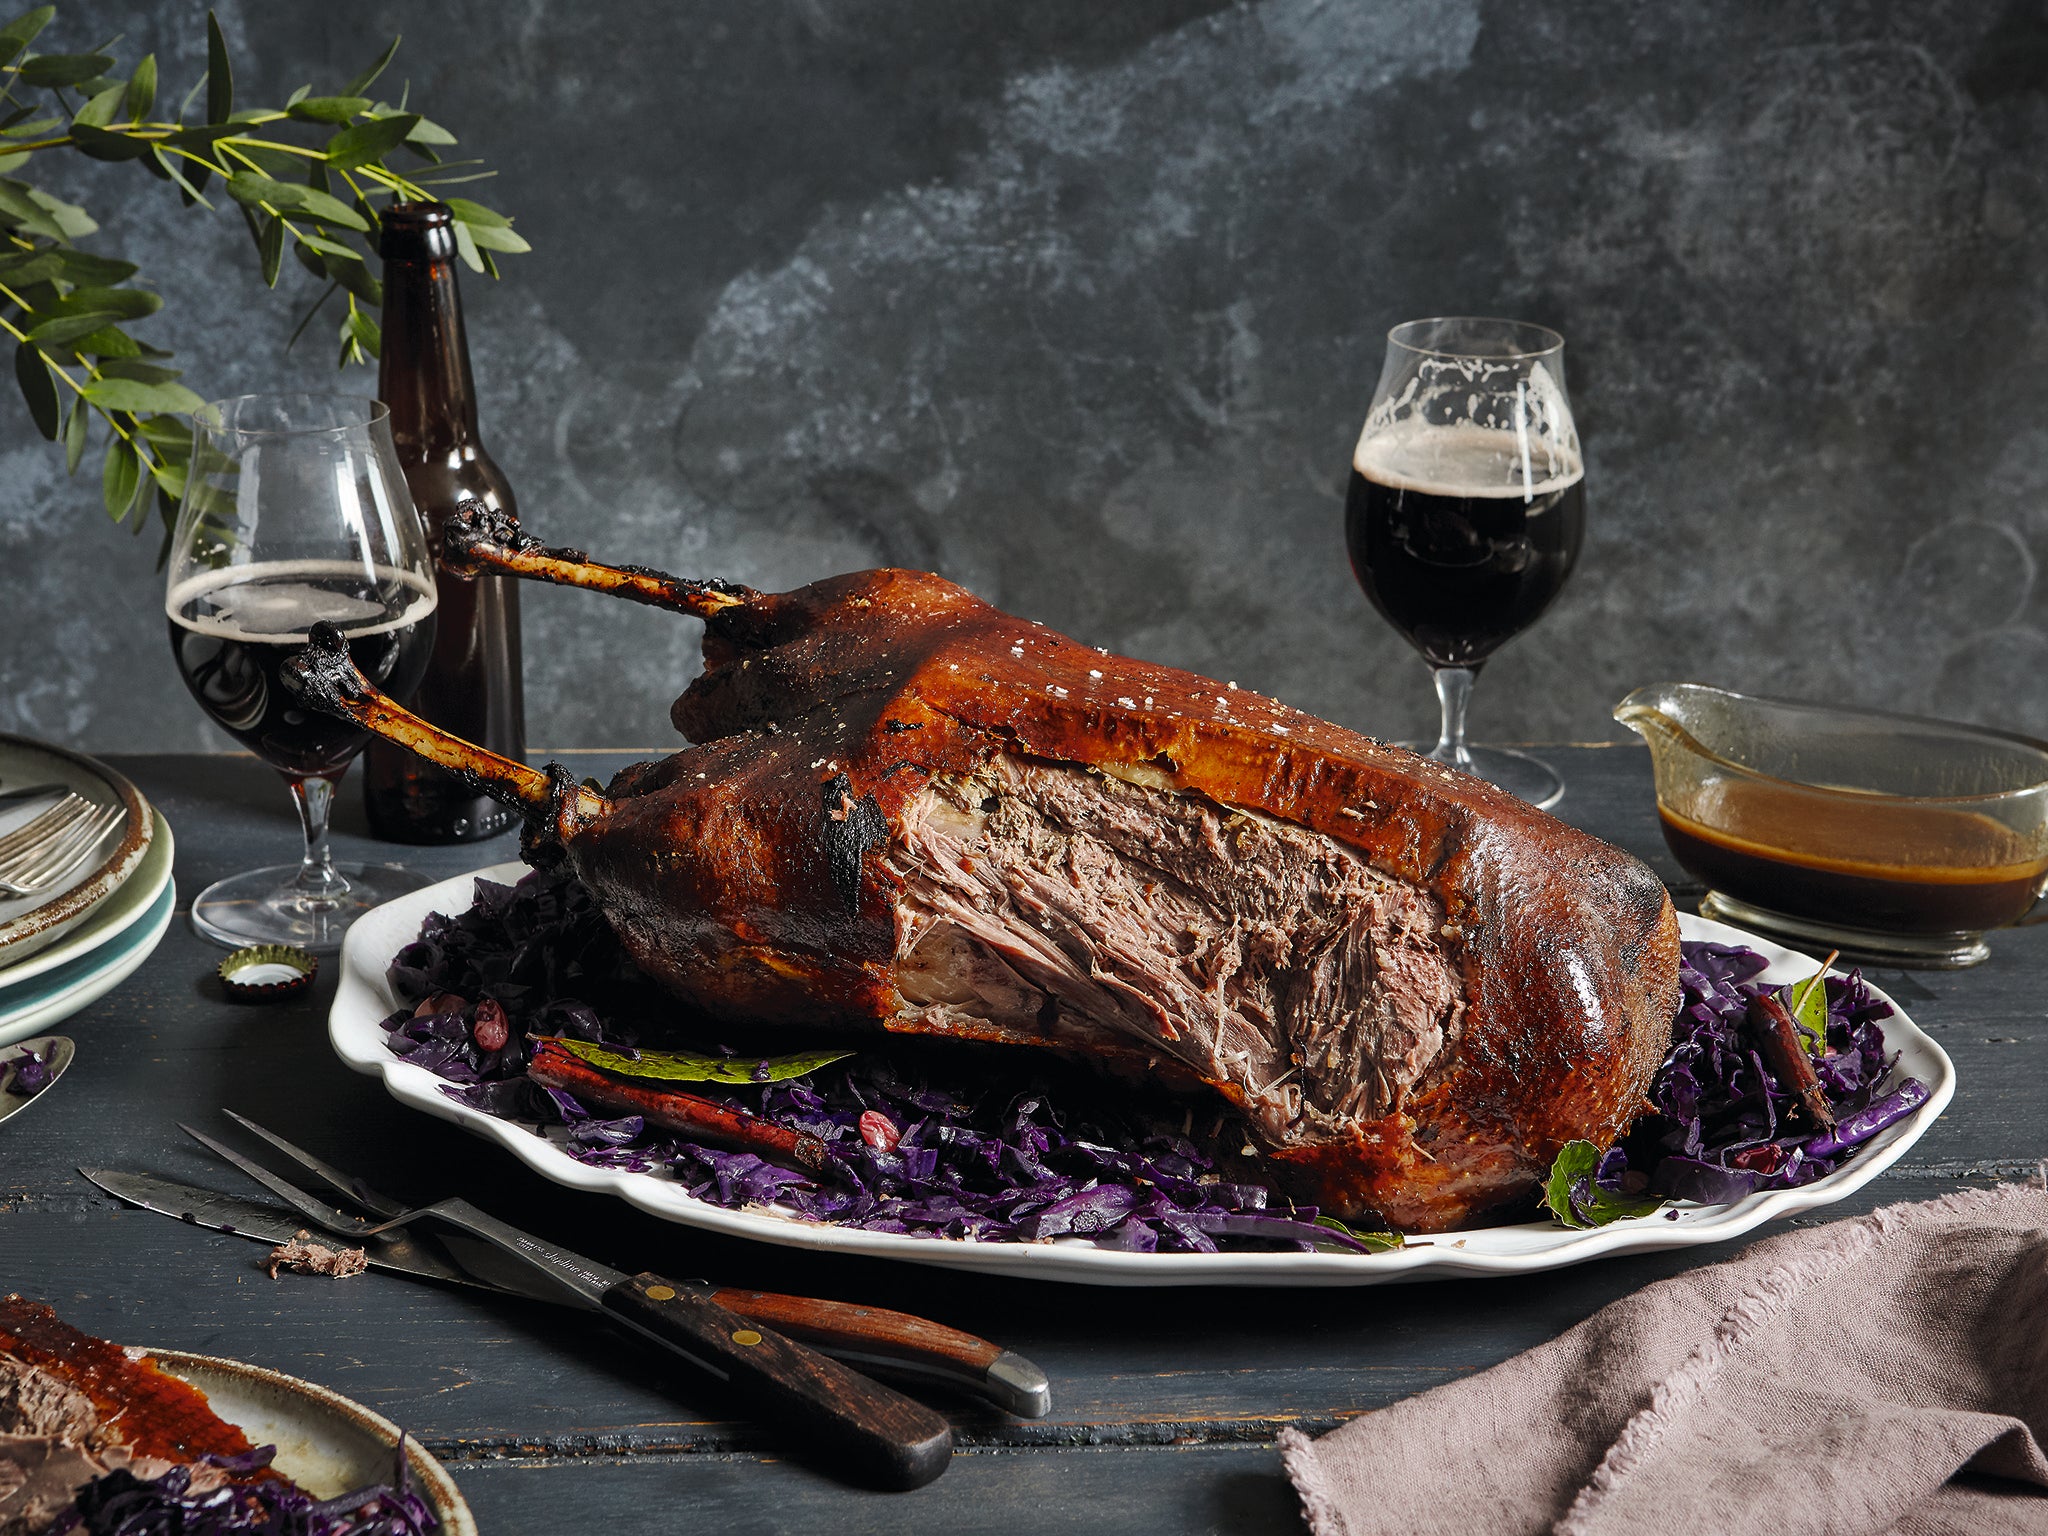 This stout-soaked bird would make an impressive Christmas centrepiece